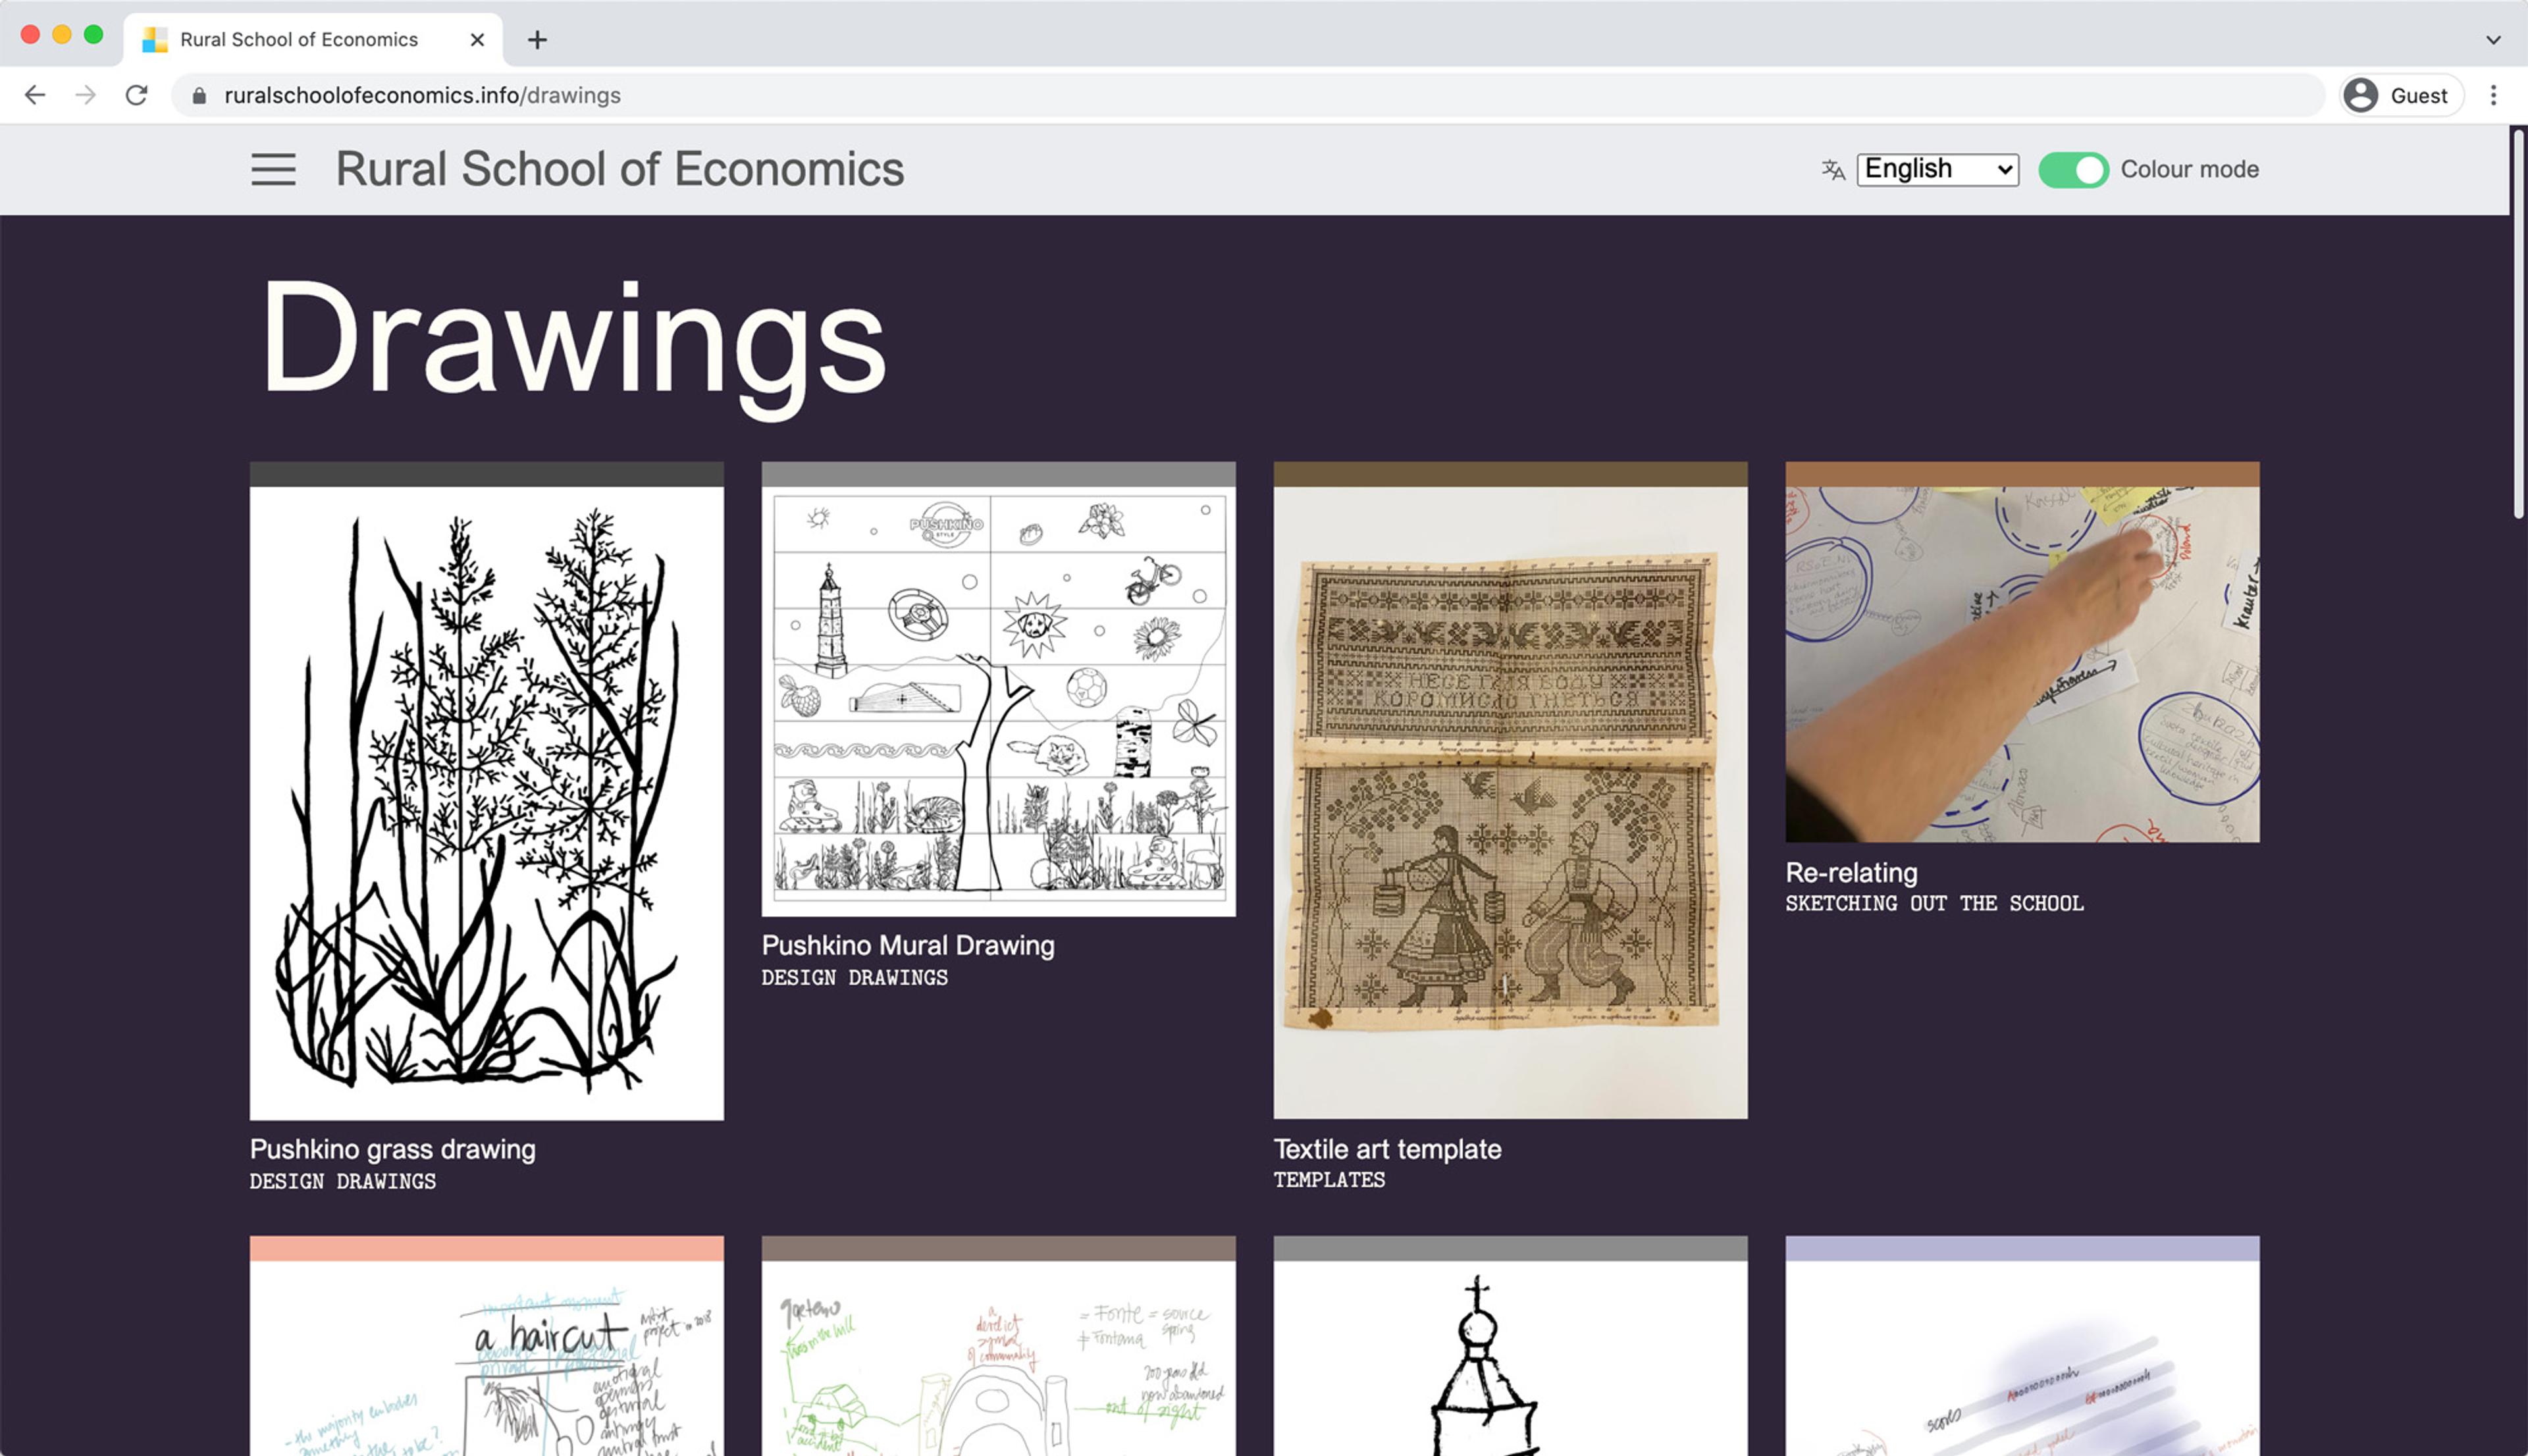 Screengrab of the Rural School of Economics drawings index, a grid of maps, sketches and photographs of drawings